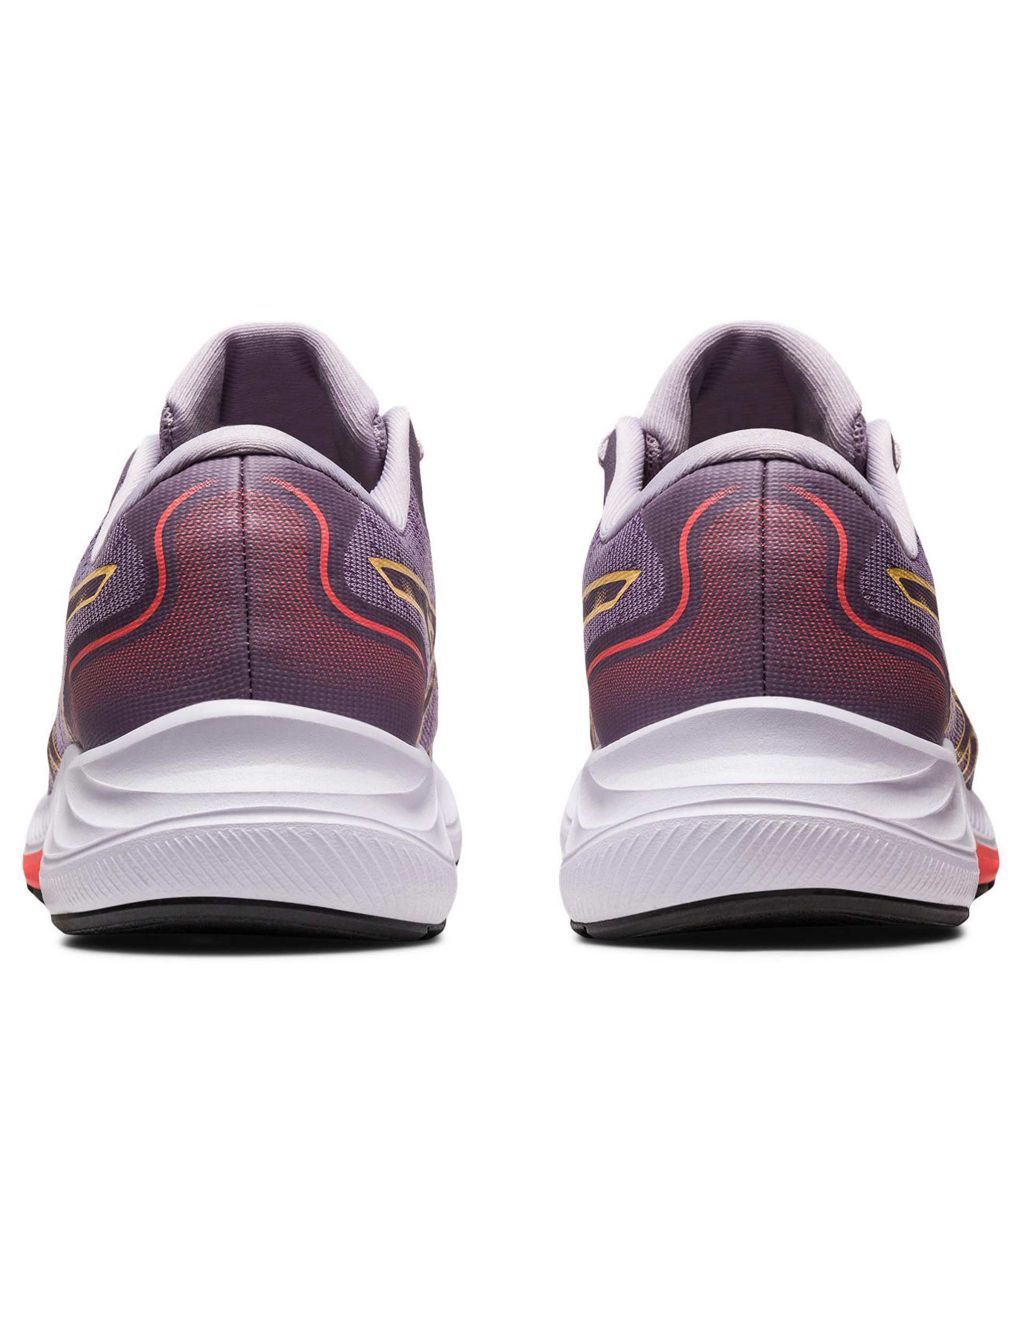 GEL™- Excite 9 Trainers image 4